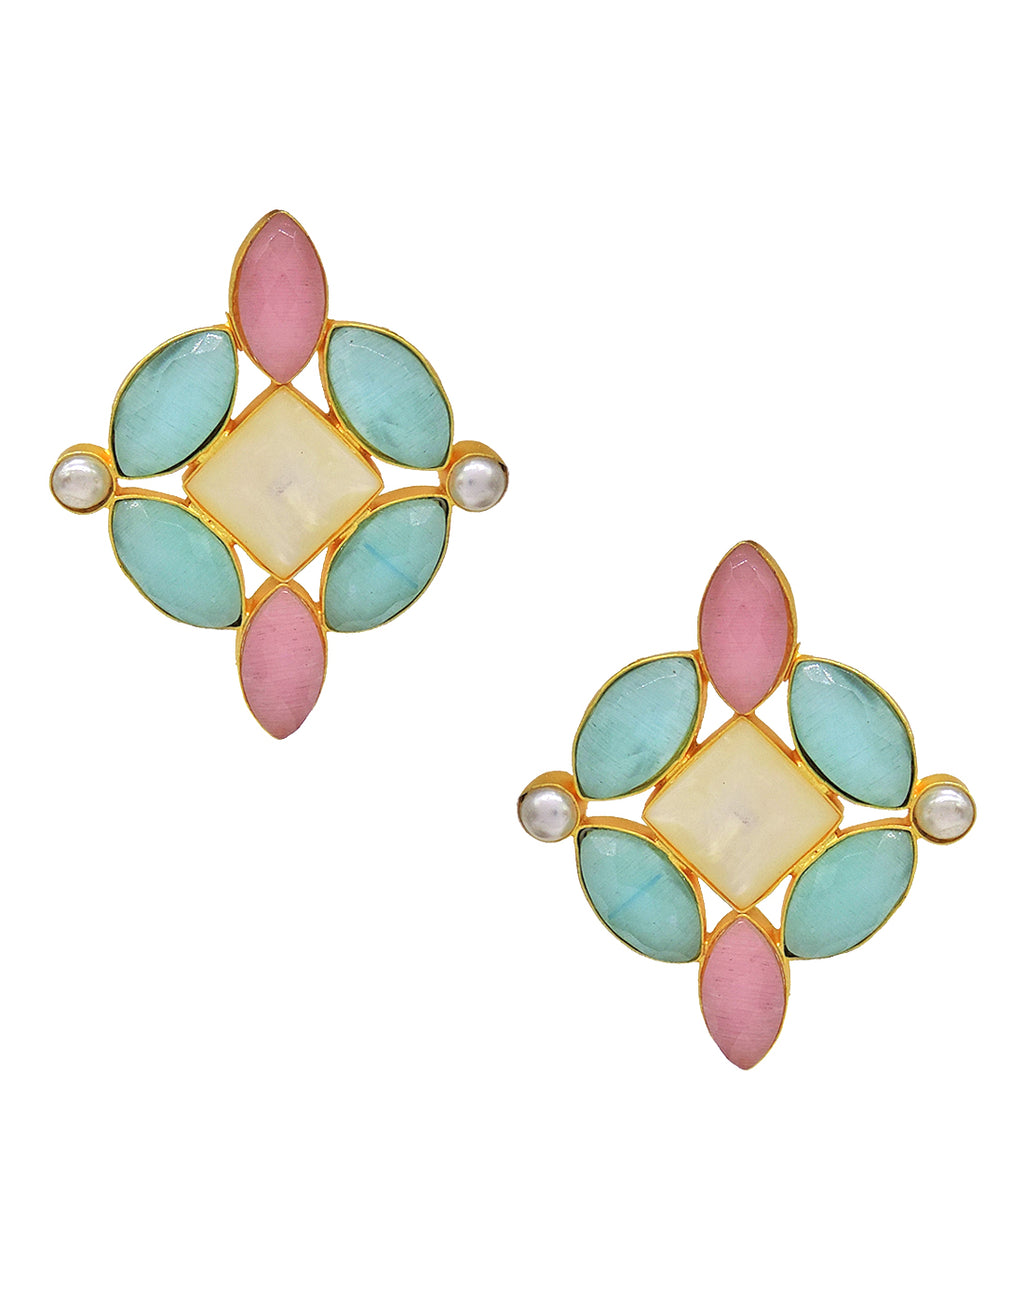 Jeweled Cluster Earrings - Statement Earrings - Gold-Plated & Hypoallergenic - Made in India - Dubai Jewellery - Dori